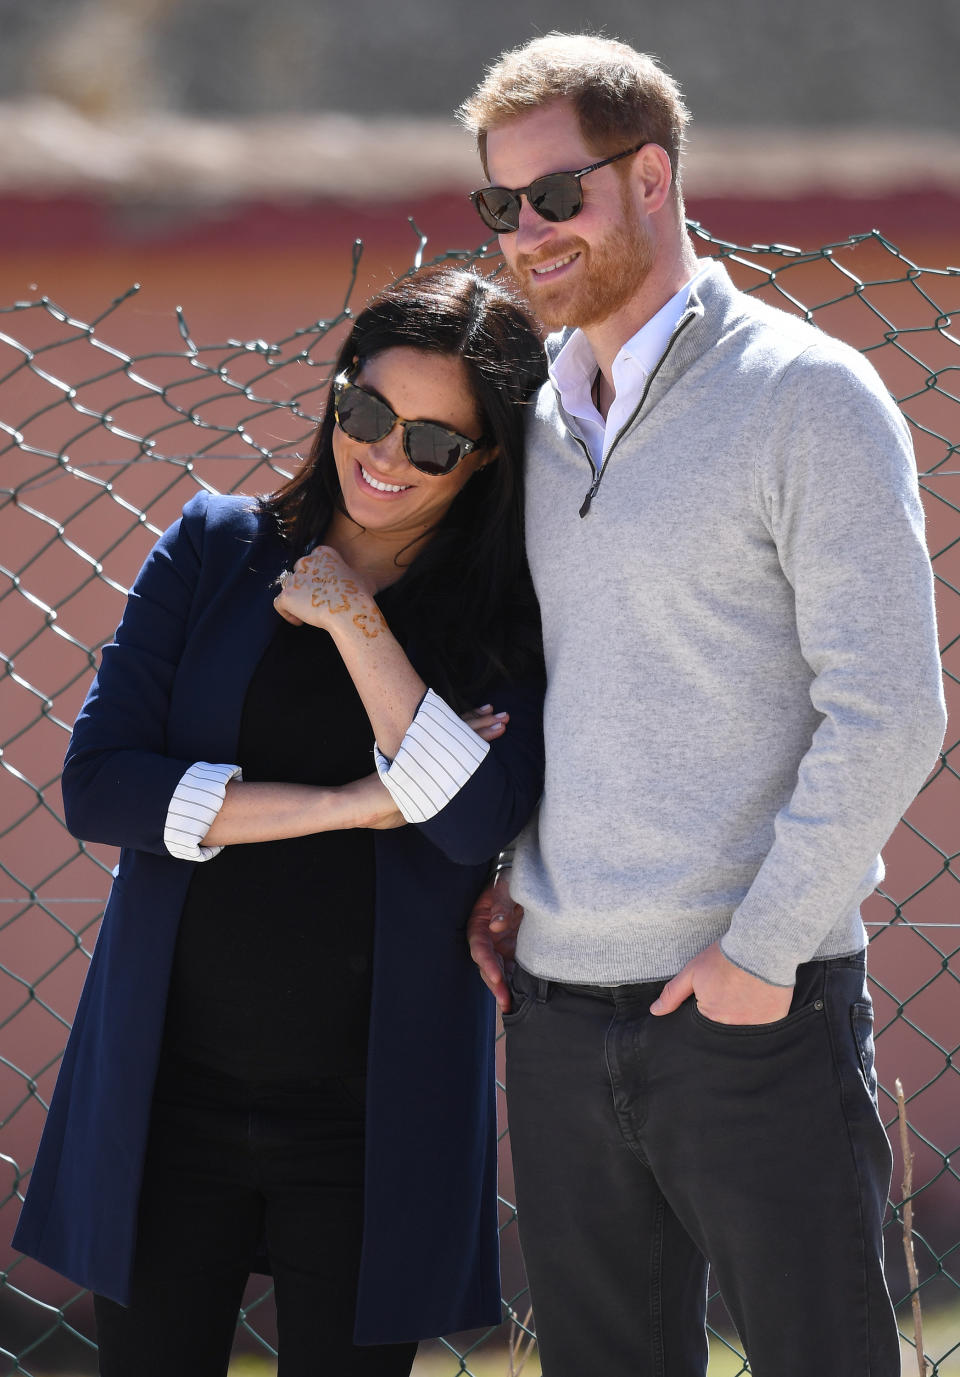 Prince Harry and Meghan Markle’s baby won’t take either of their surnames. Photo: Getty Images